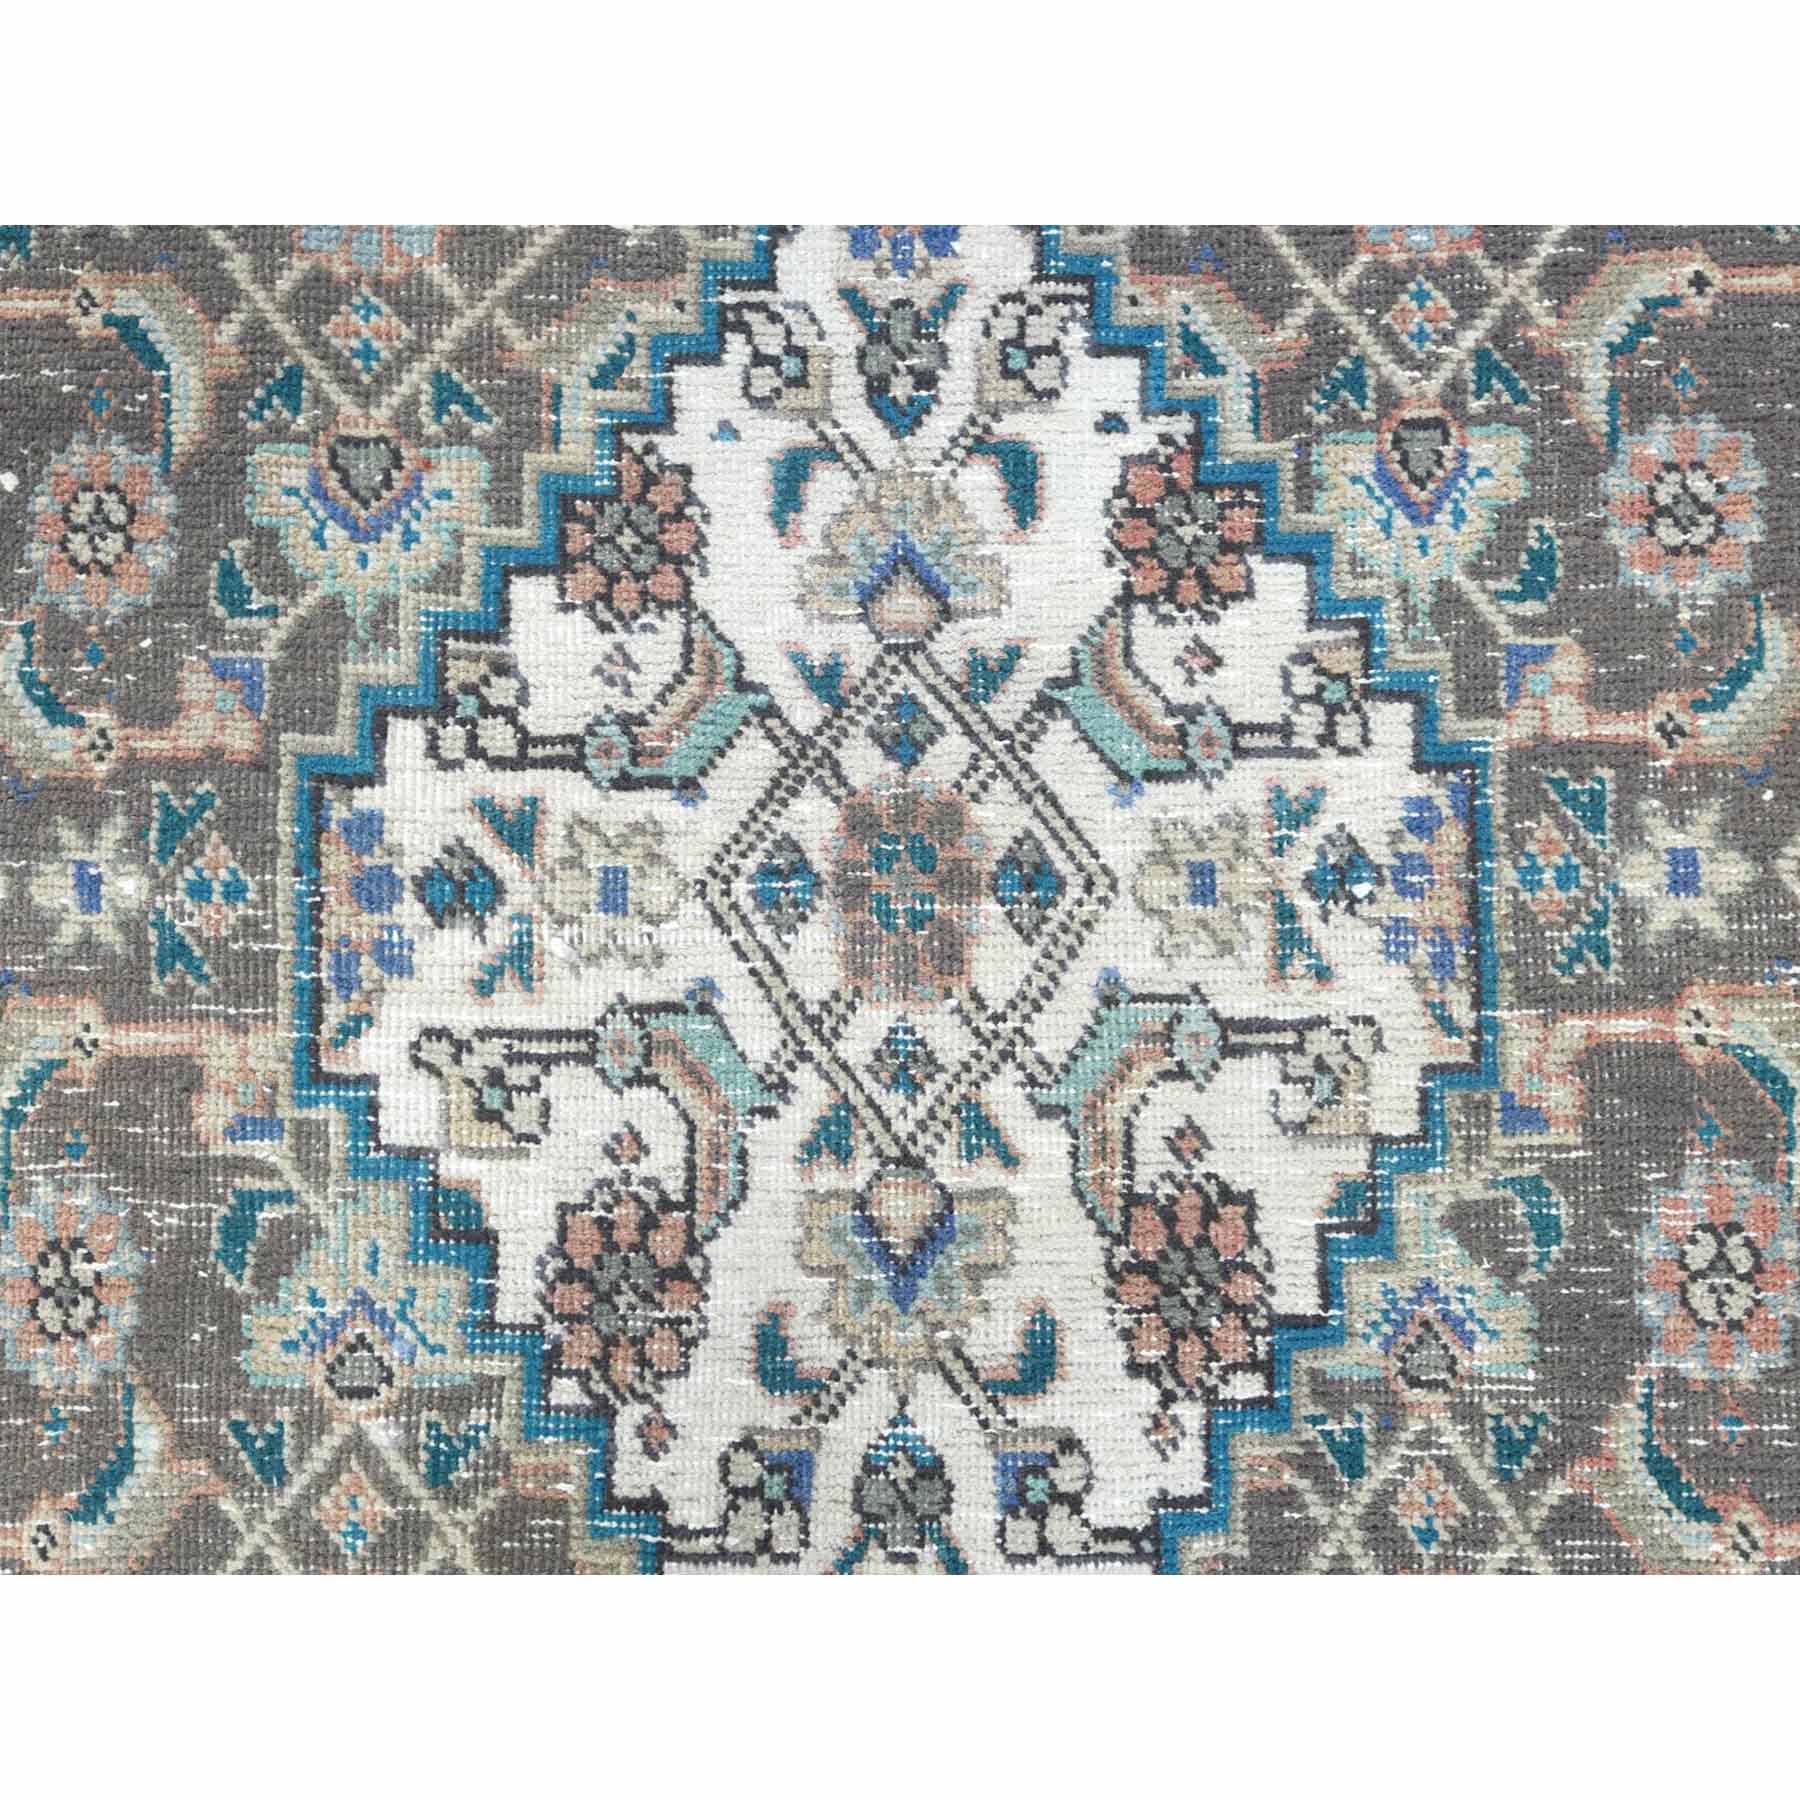 Overdyed-Vintage-Hand-Knotted-Rug-309945